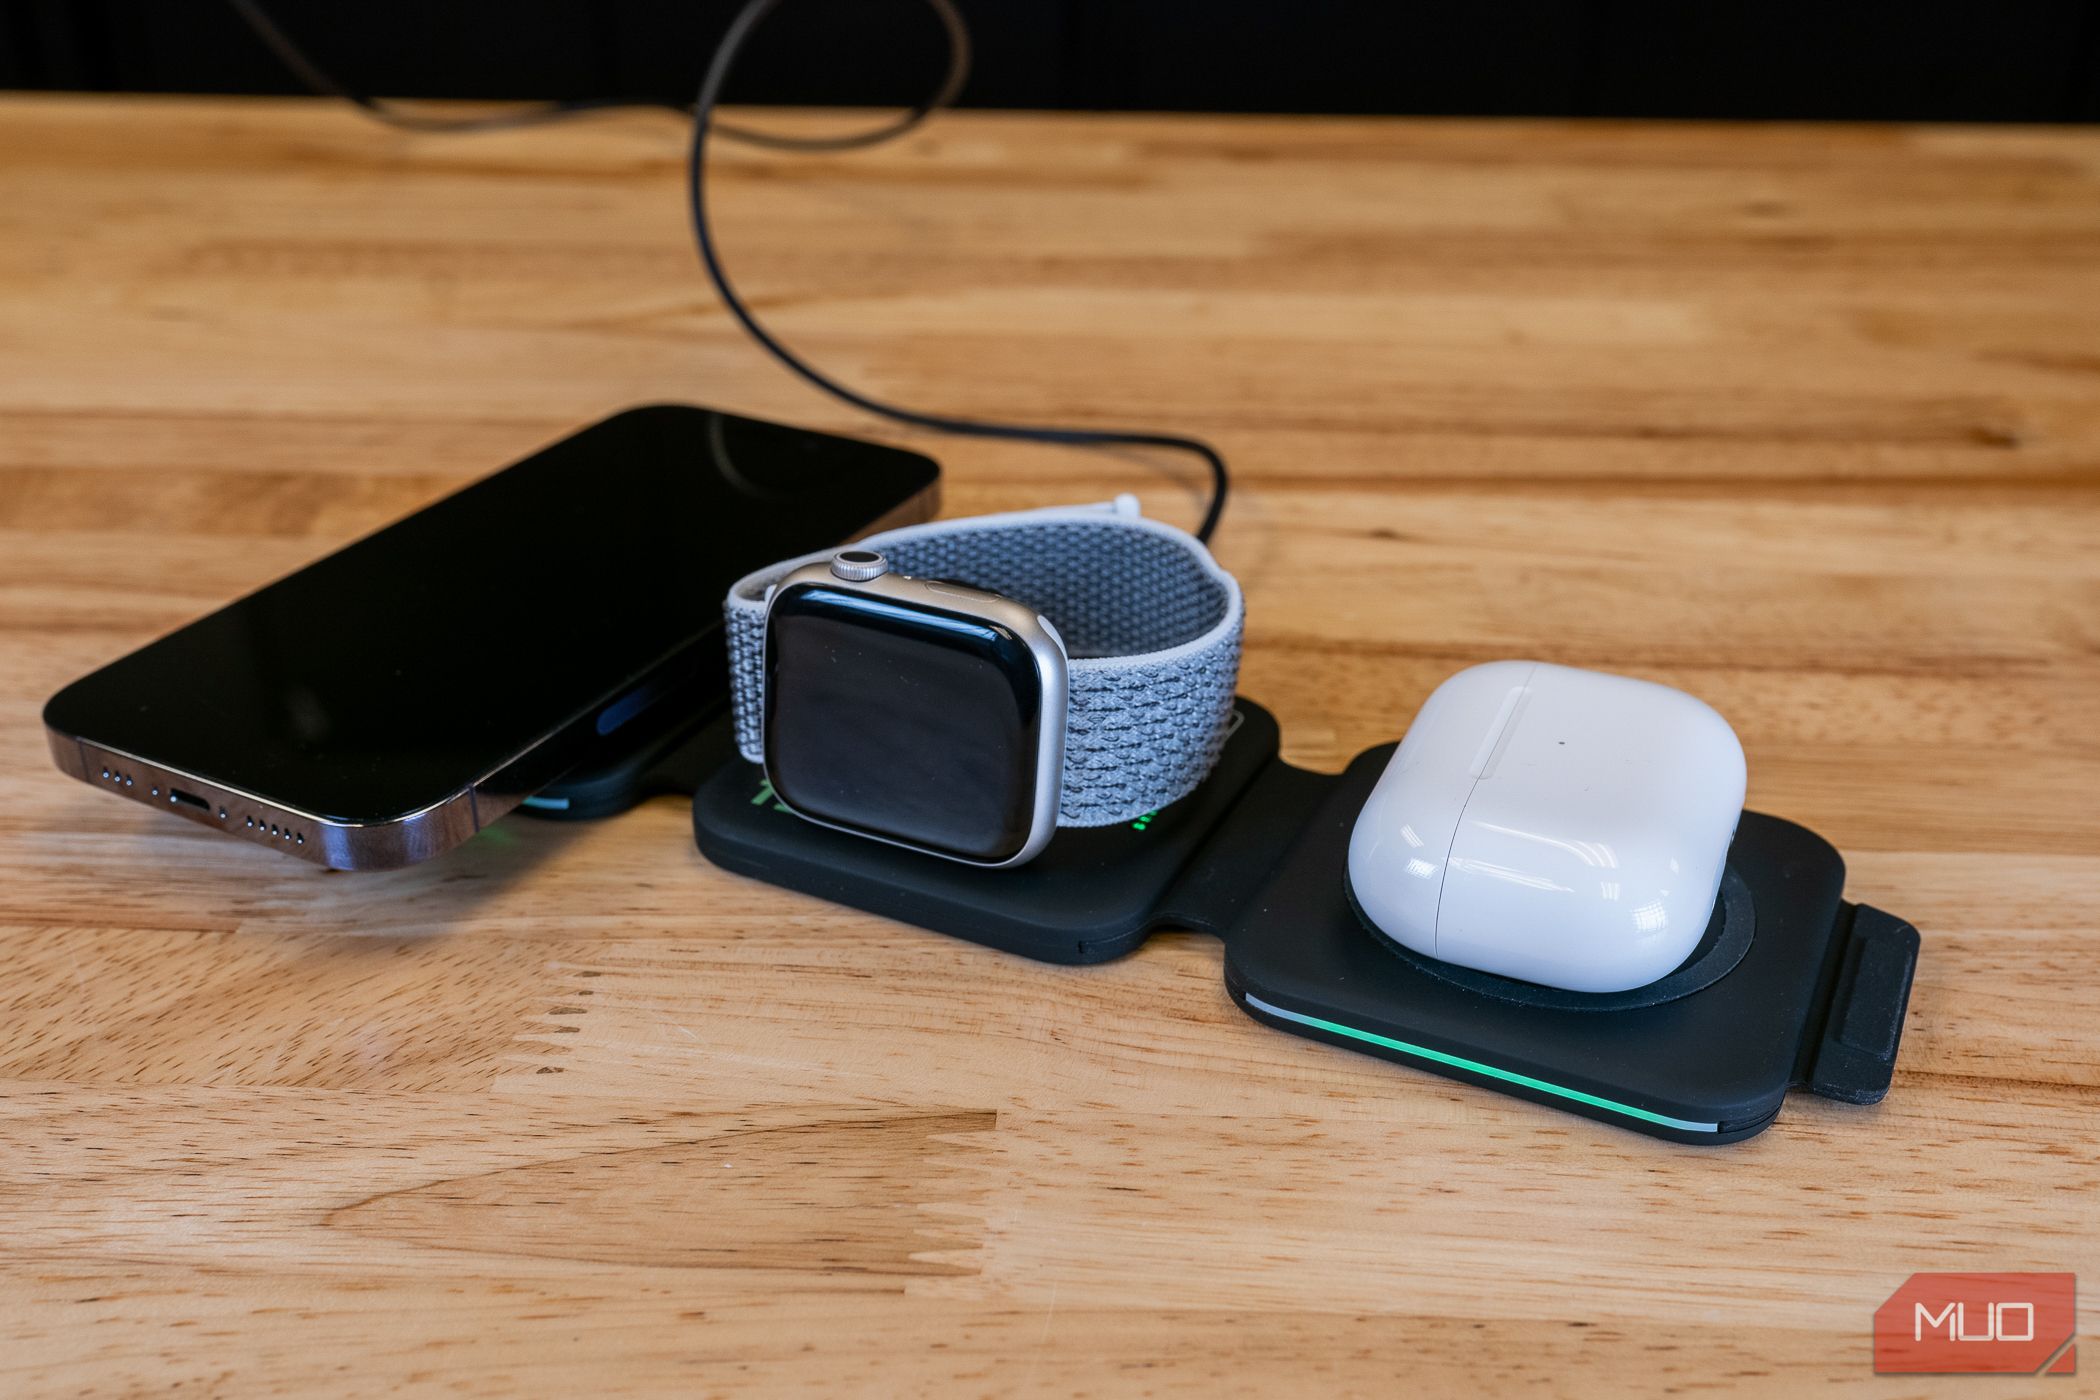 Infinacore T3 charging an iPhone, Apple Watch and Airpods